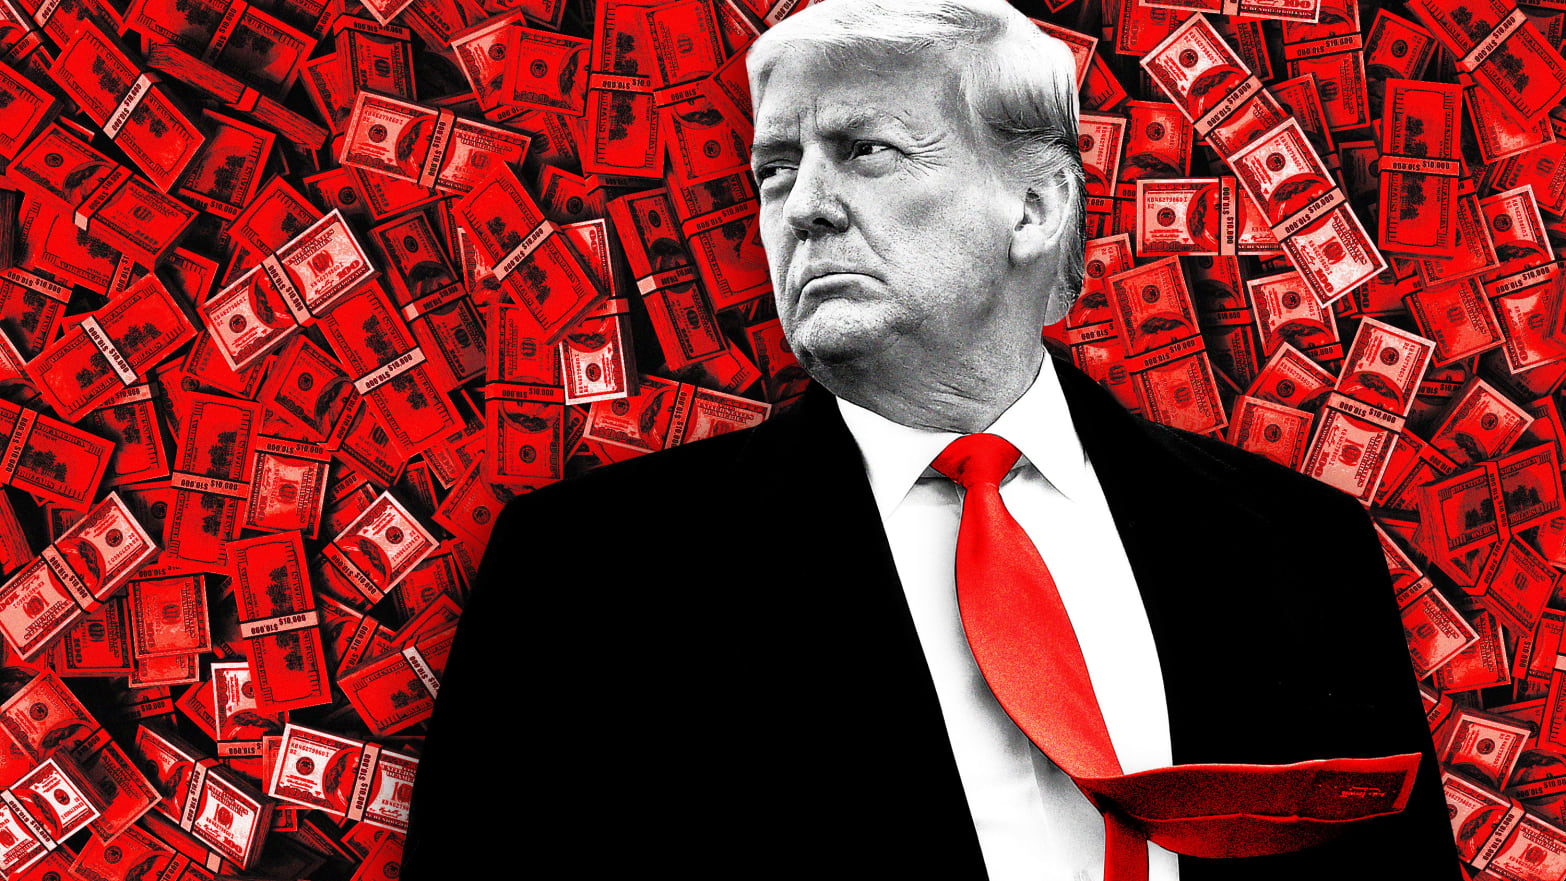 An illustration that includes a photo of former U.S President Donald Trump and a pile of money